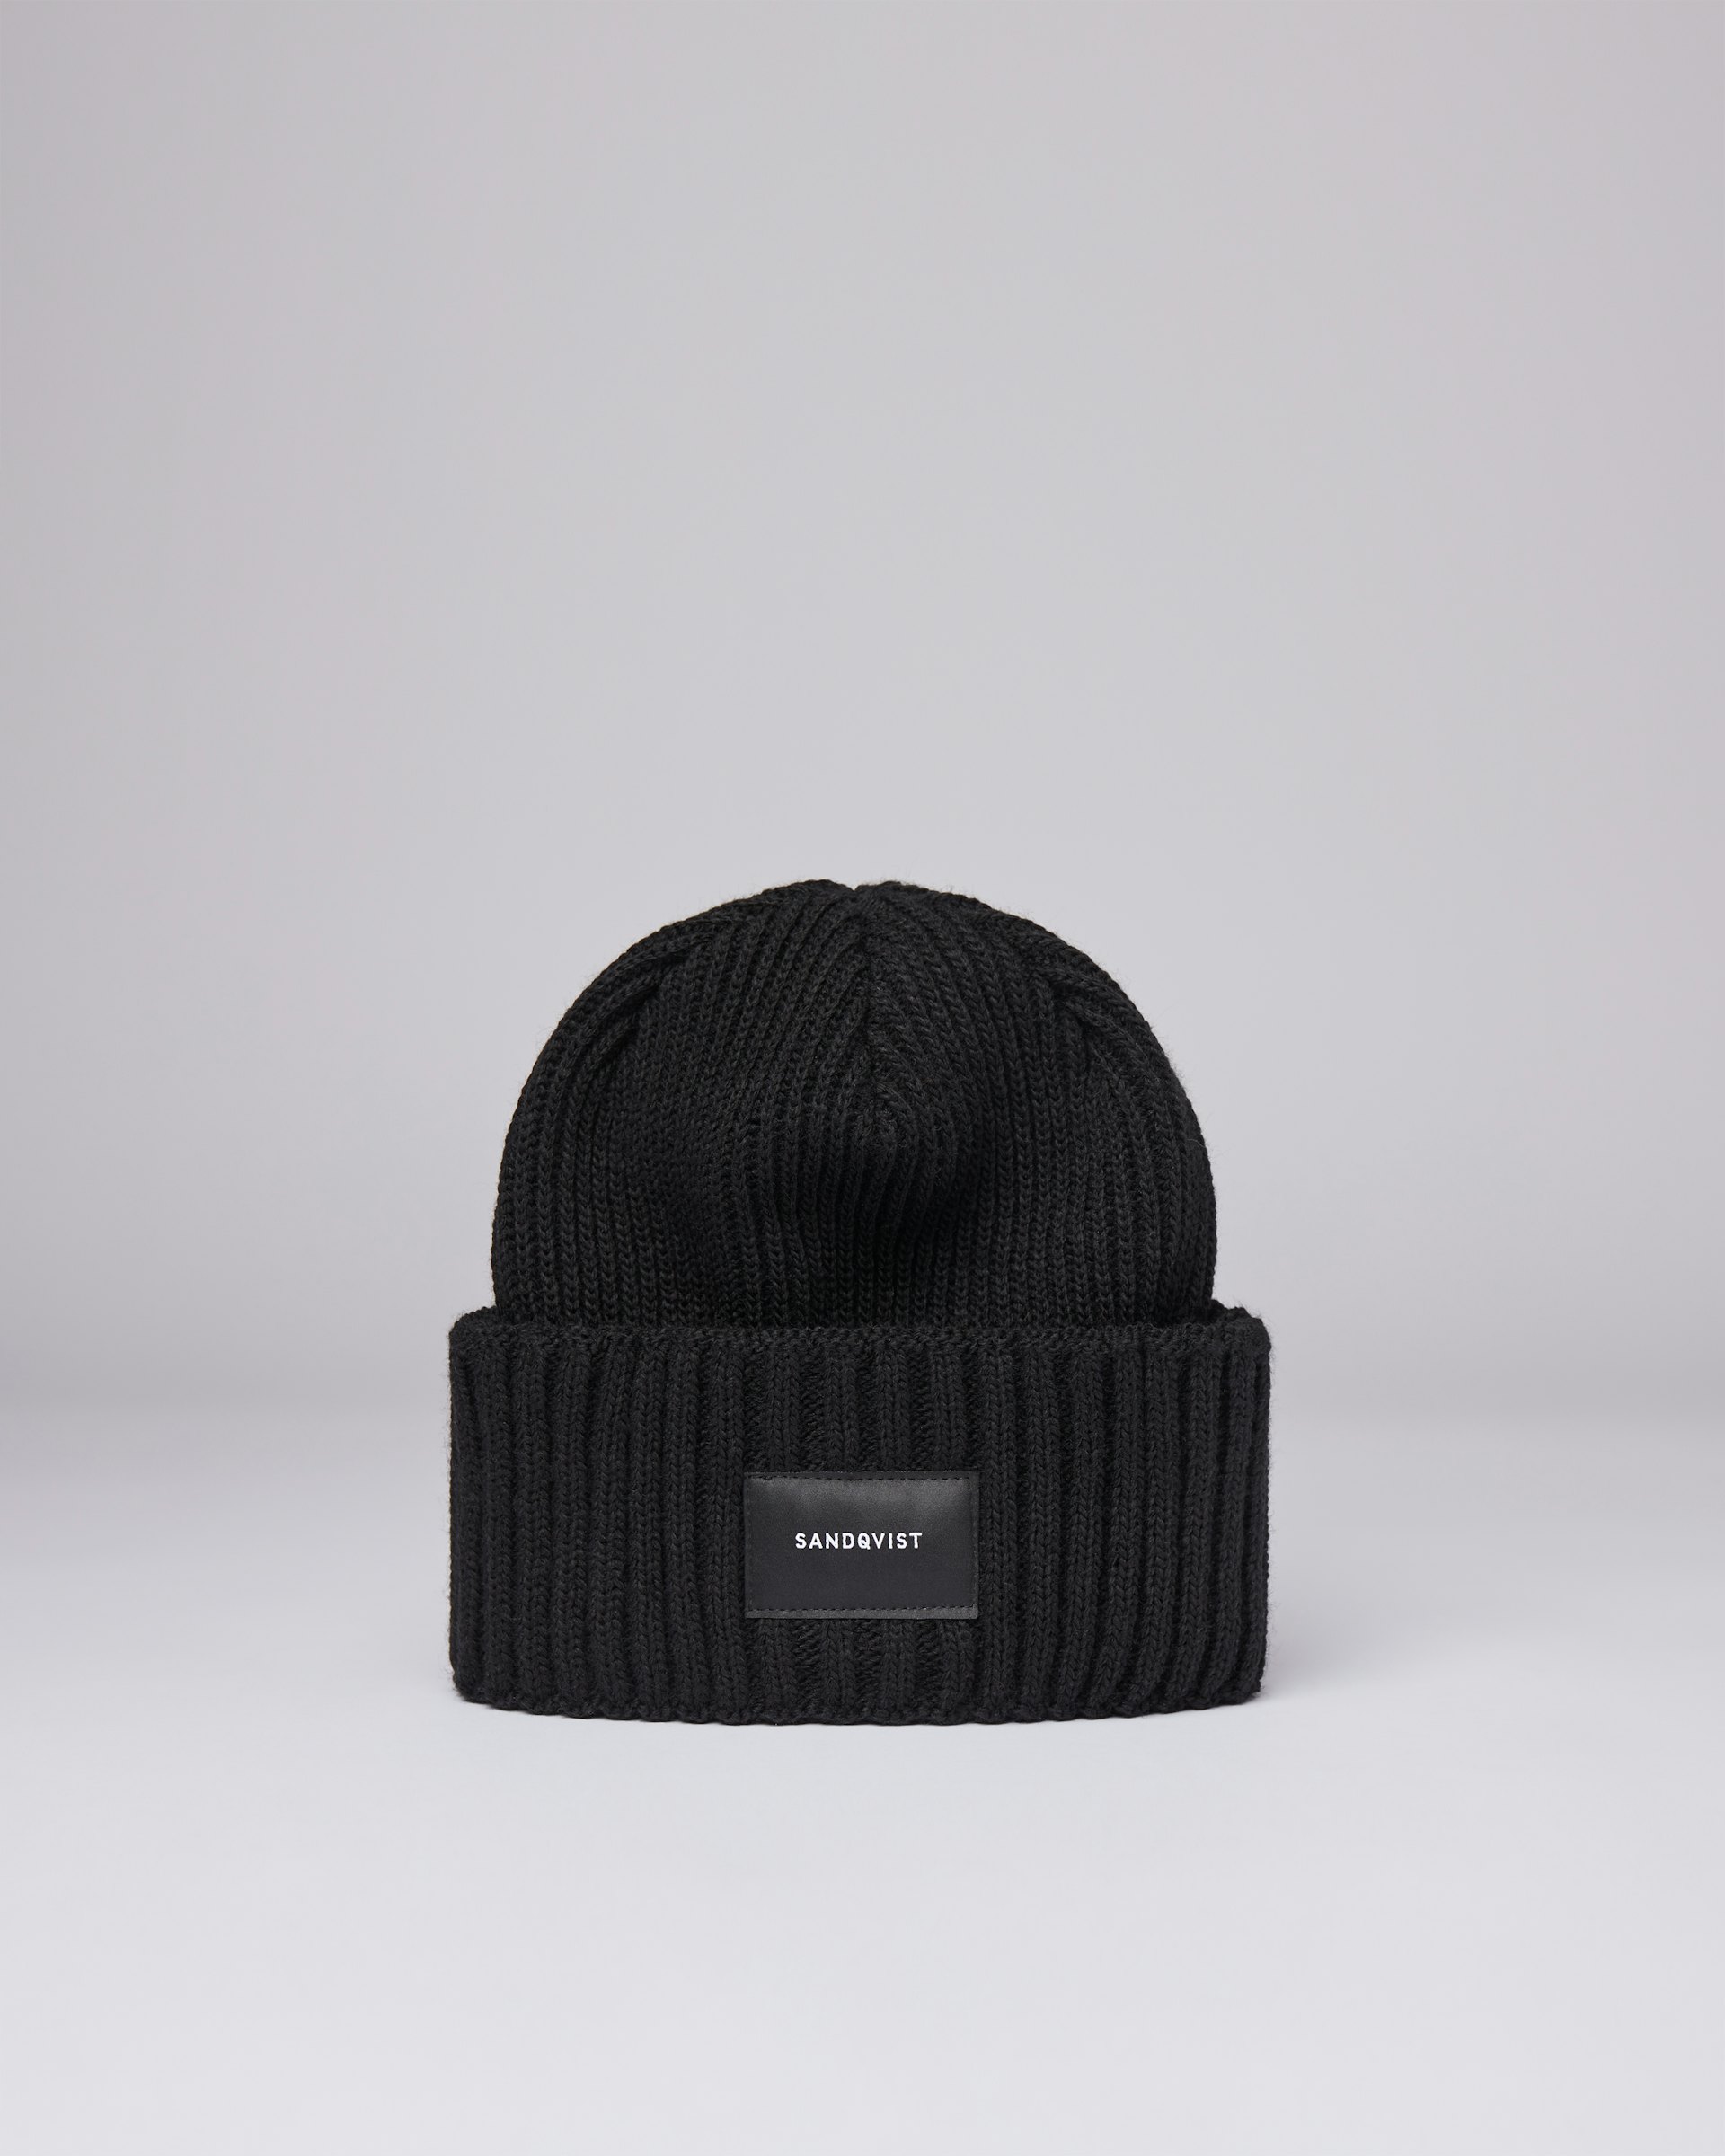 Knitted cap belongs to the category Items and is in color black (1 of 3)